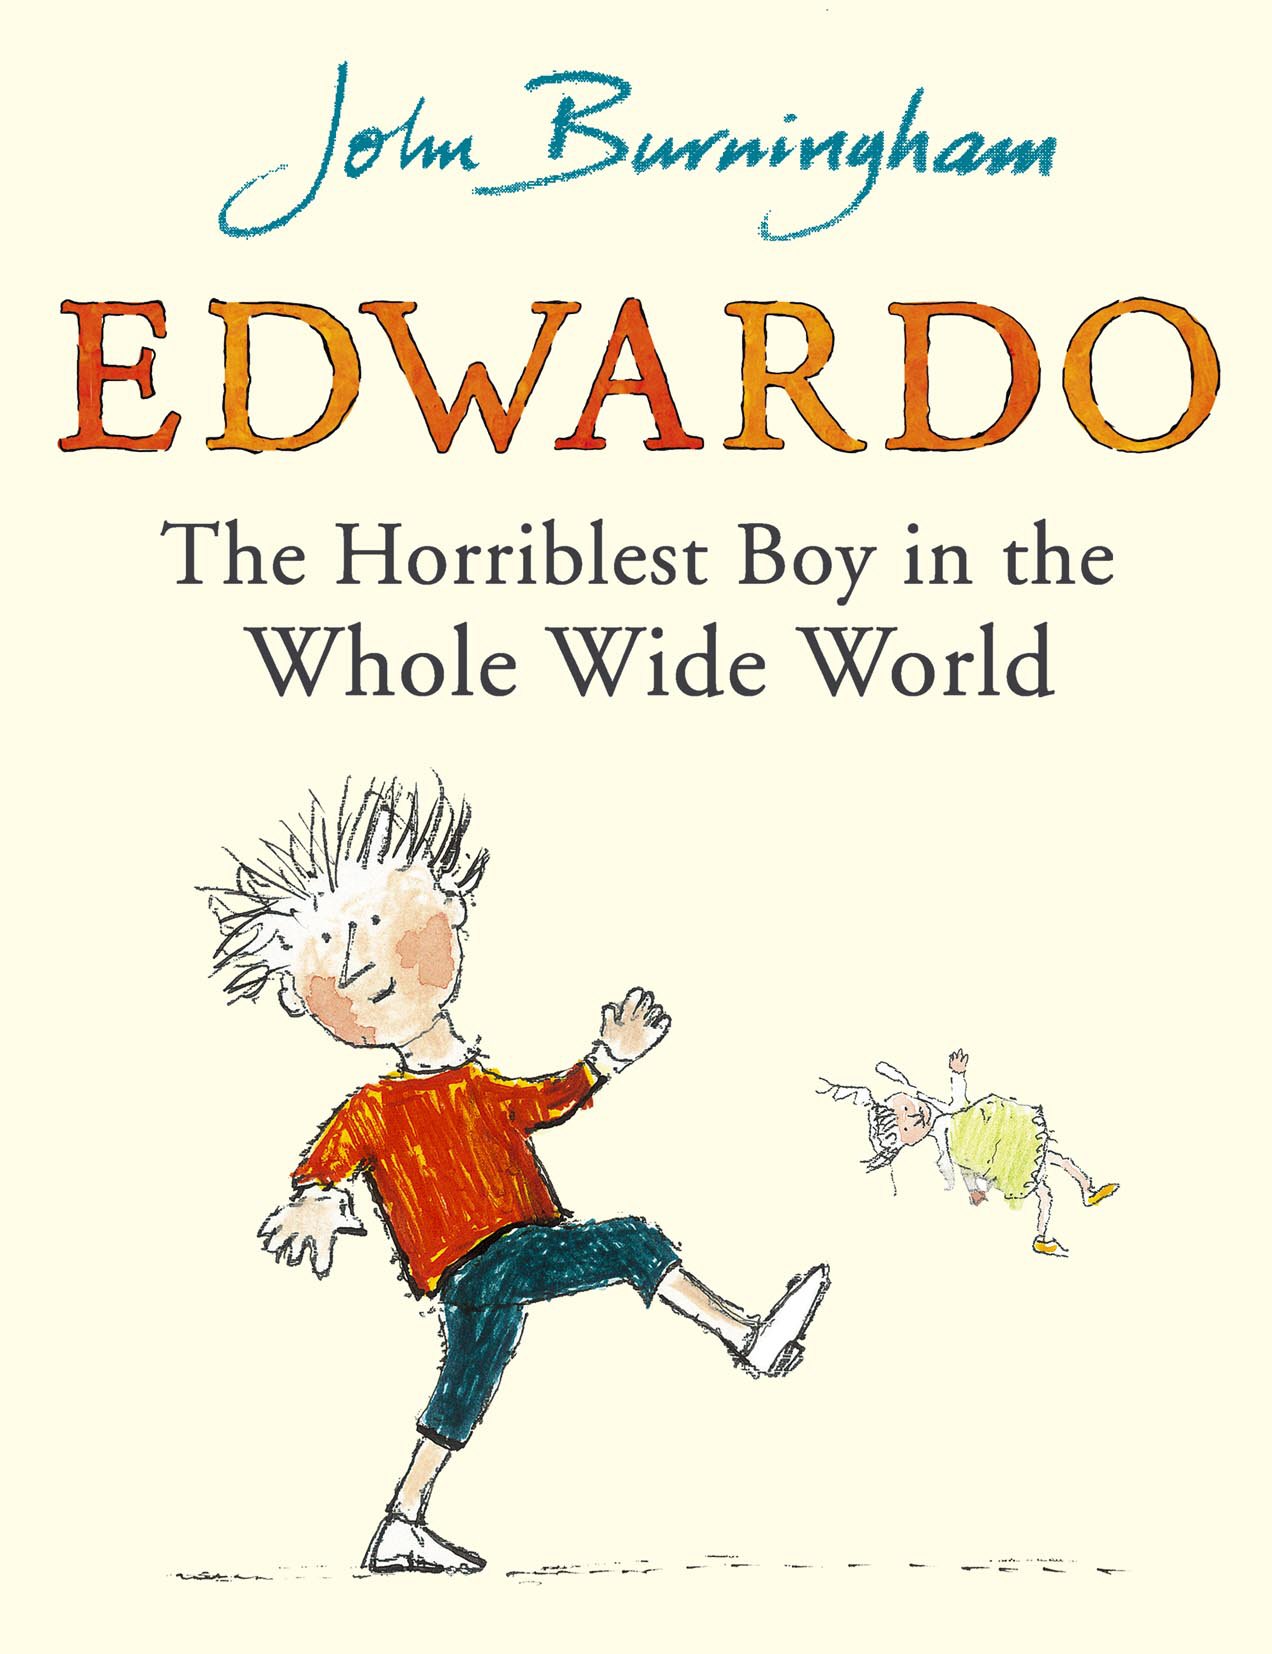 Edwardo: The Horriblest Boy in the Whole Wide World